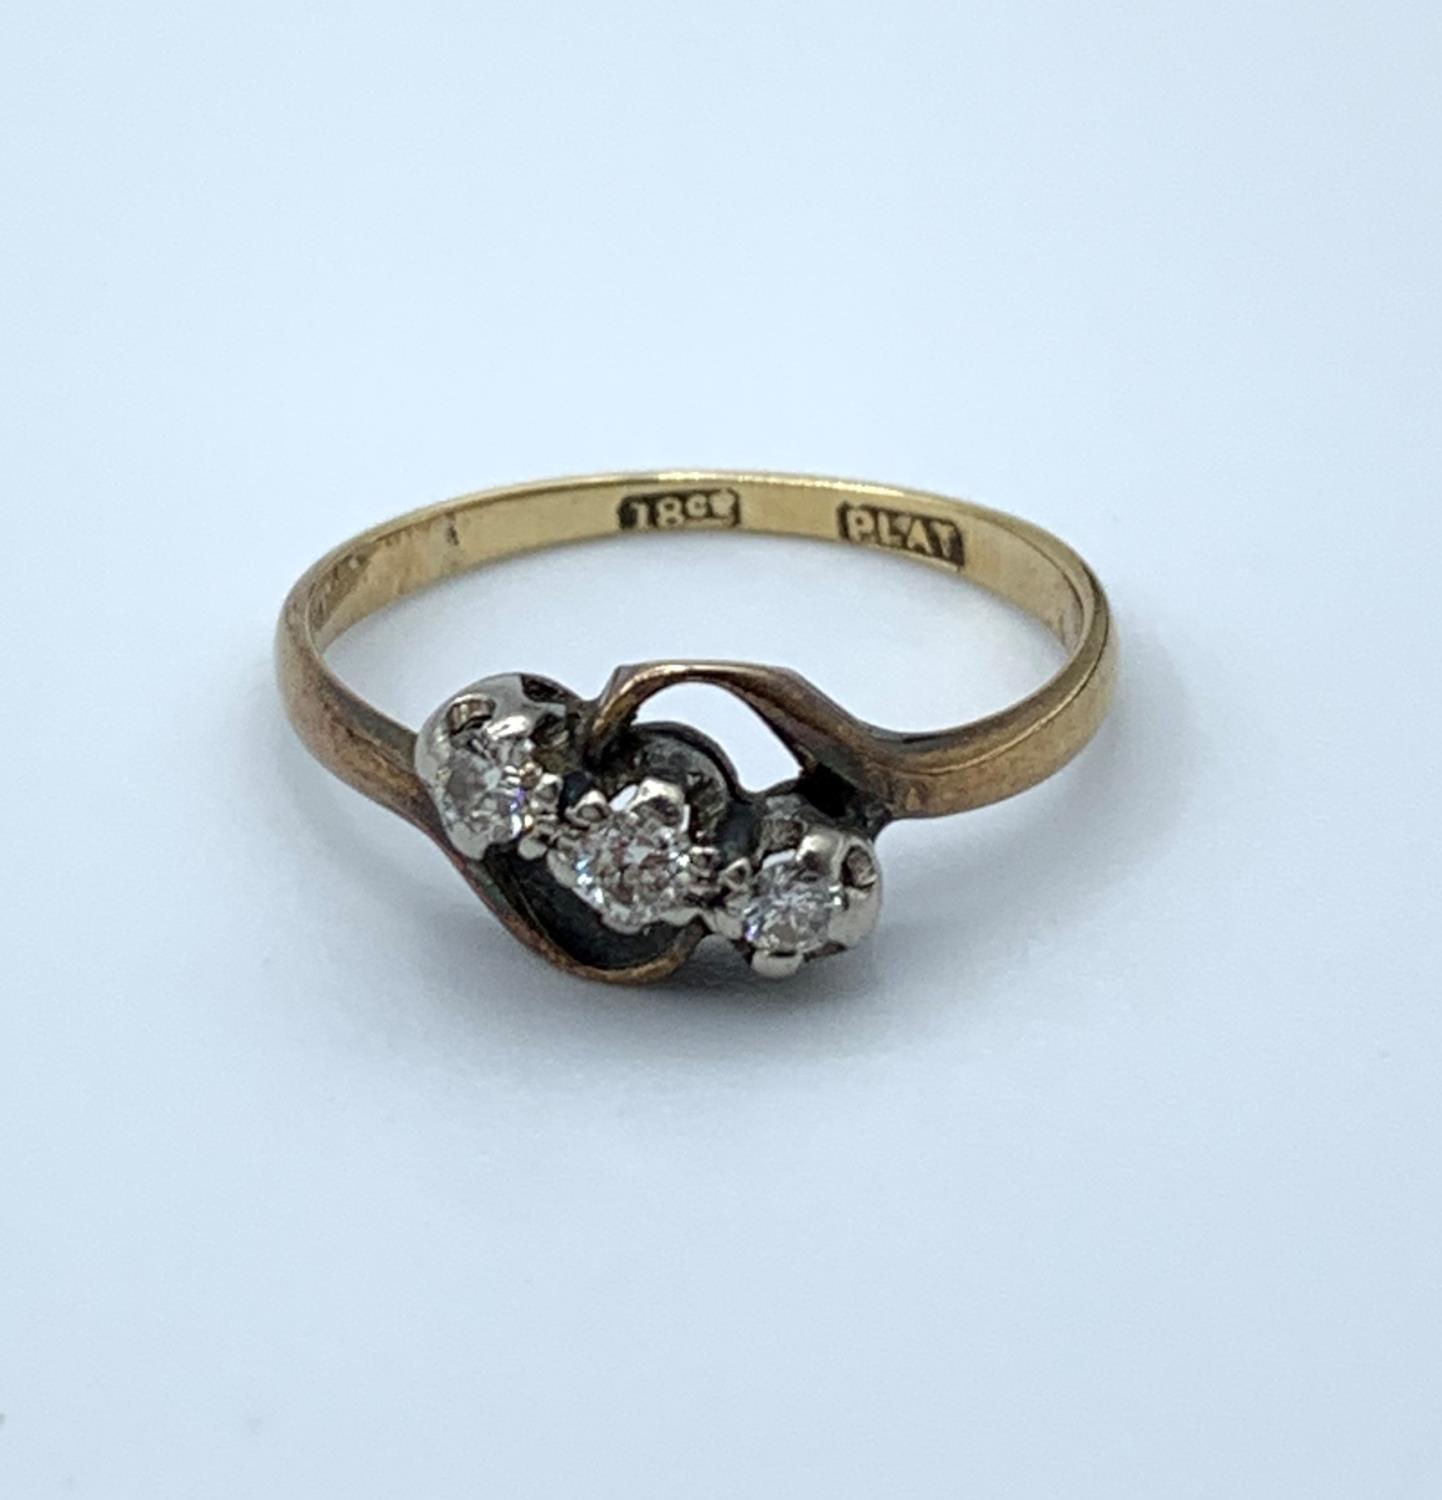 A Vintage 18ct Rose Gold Cross Over Ring with Diamonds Trilogy Set in Platinum, 1.8g, Size K/L - Image 4 of 4